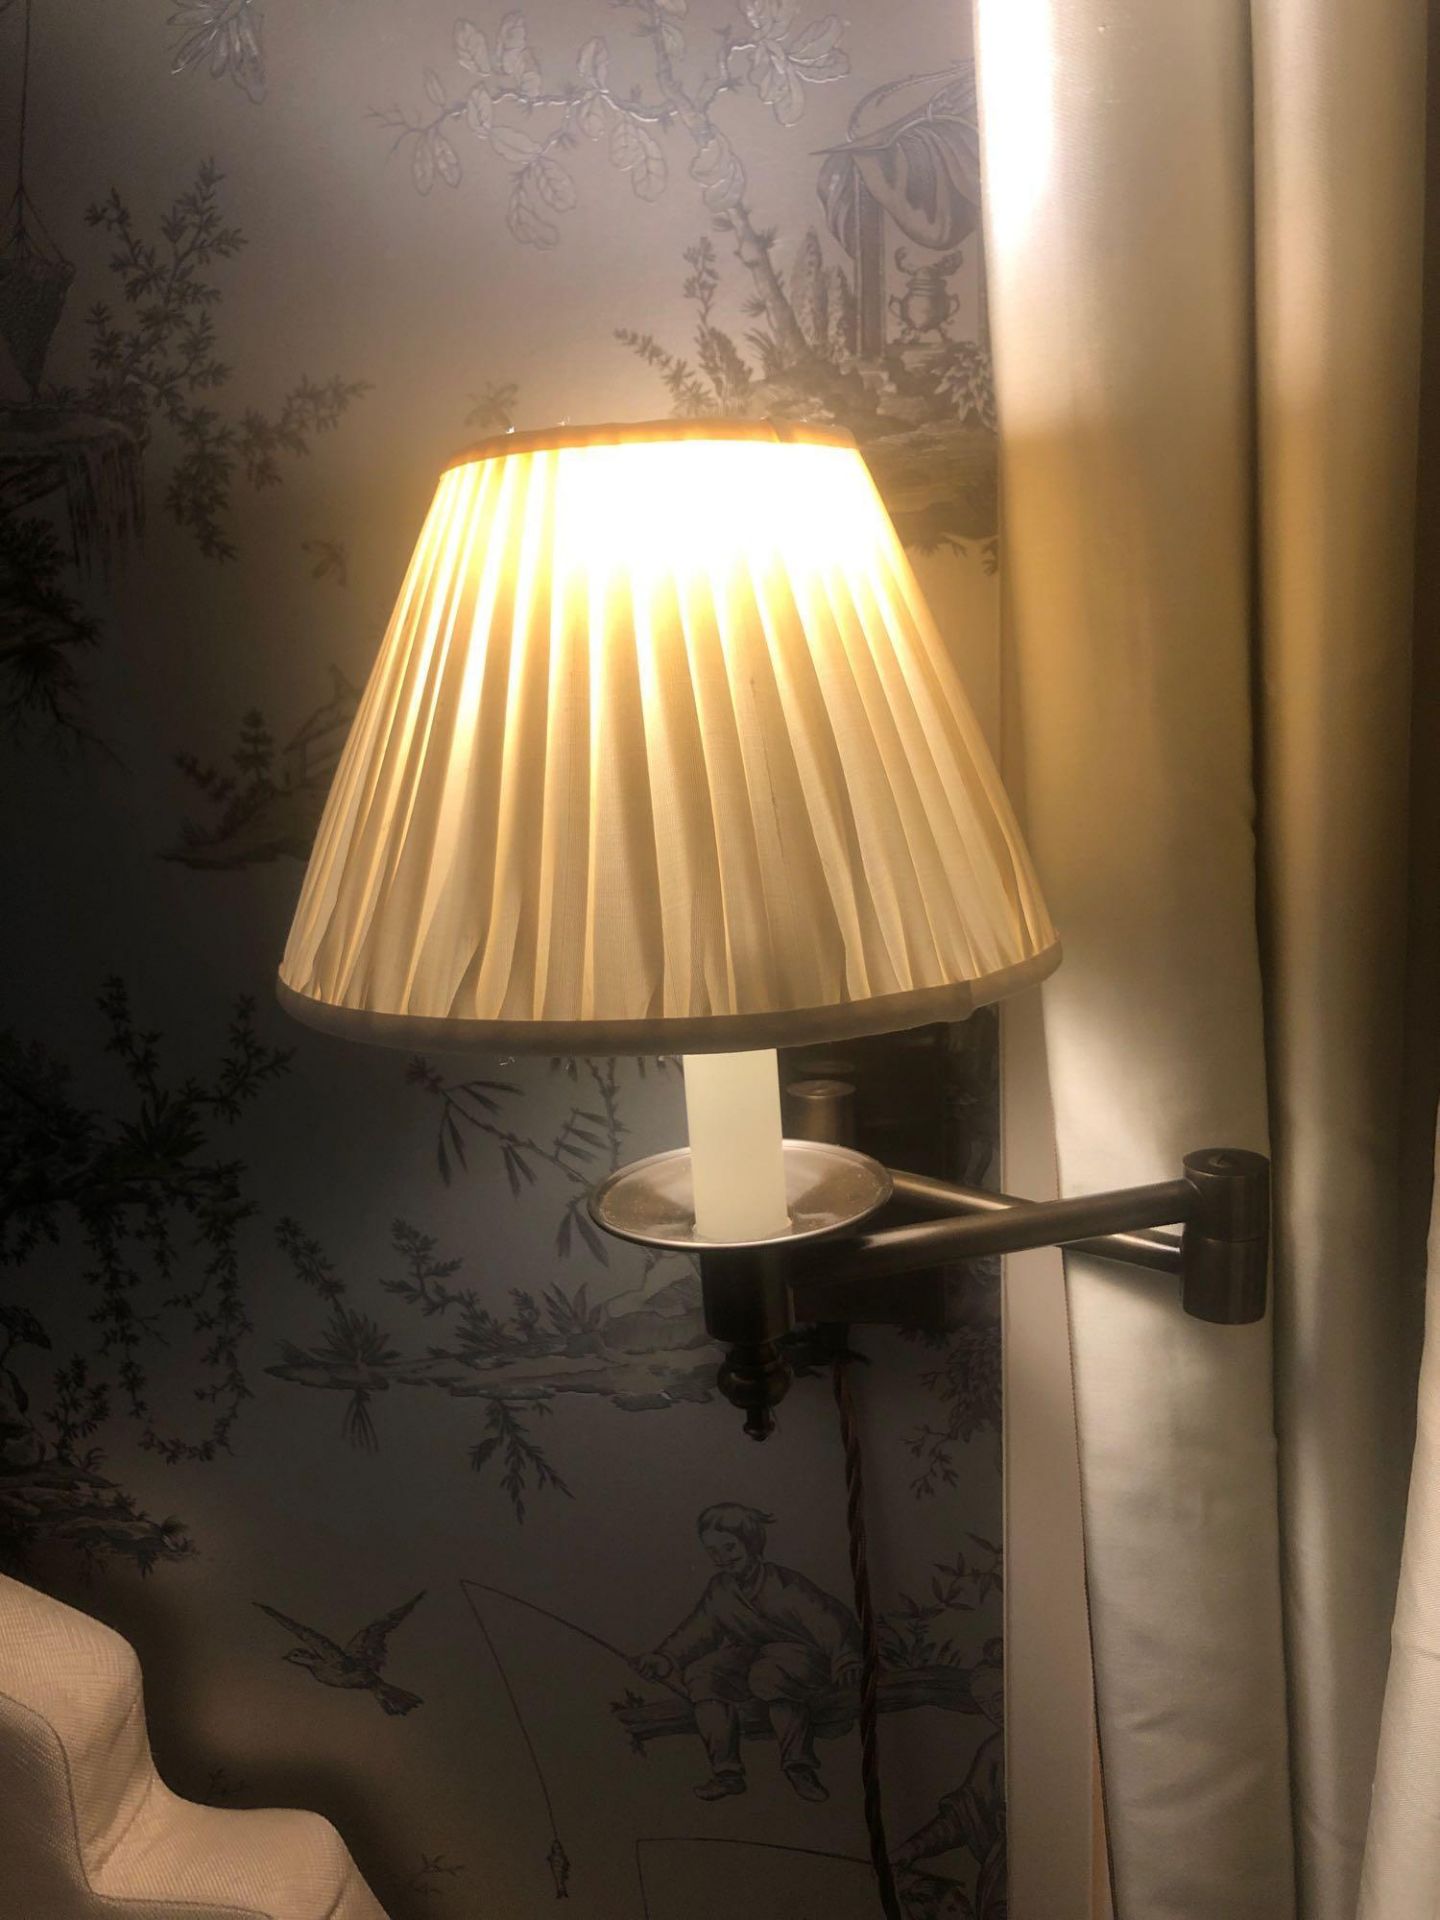 A Pair Of Gentlemen Library Swing Arm Single Candle Wall Sconce With Pleated Shade (Room 217/8)